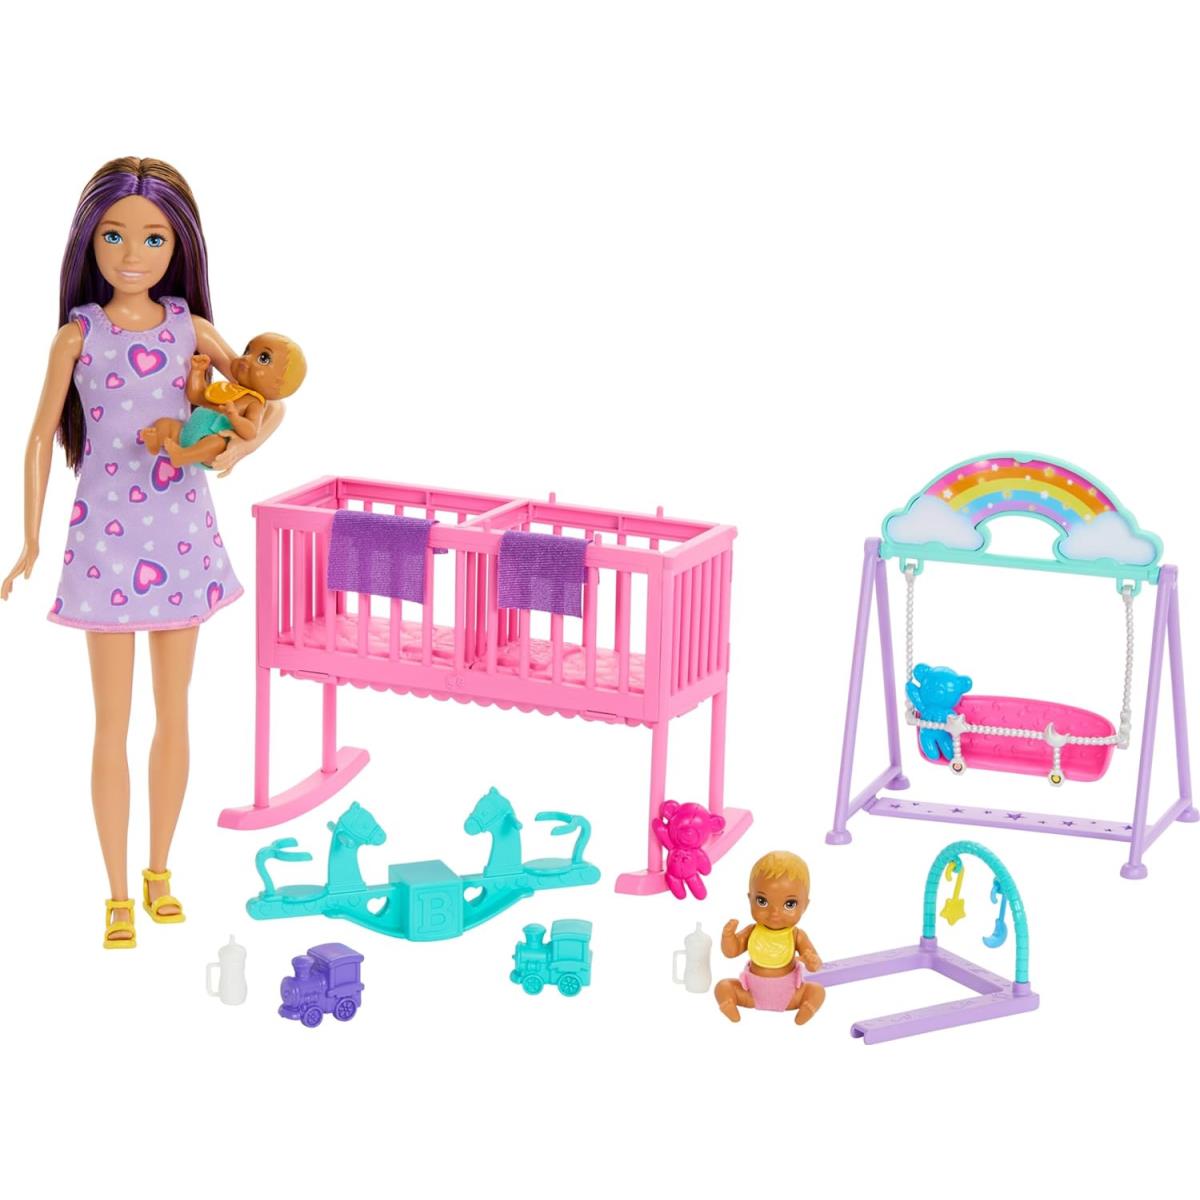 Barbie Skipper Doll Nursery Playset with Accessories Includes Twin Baby Dolls